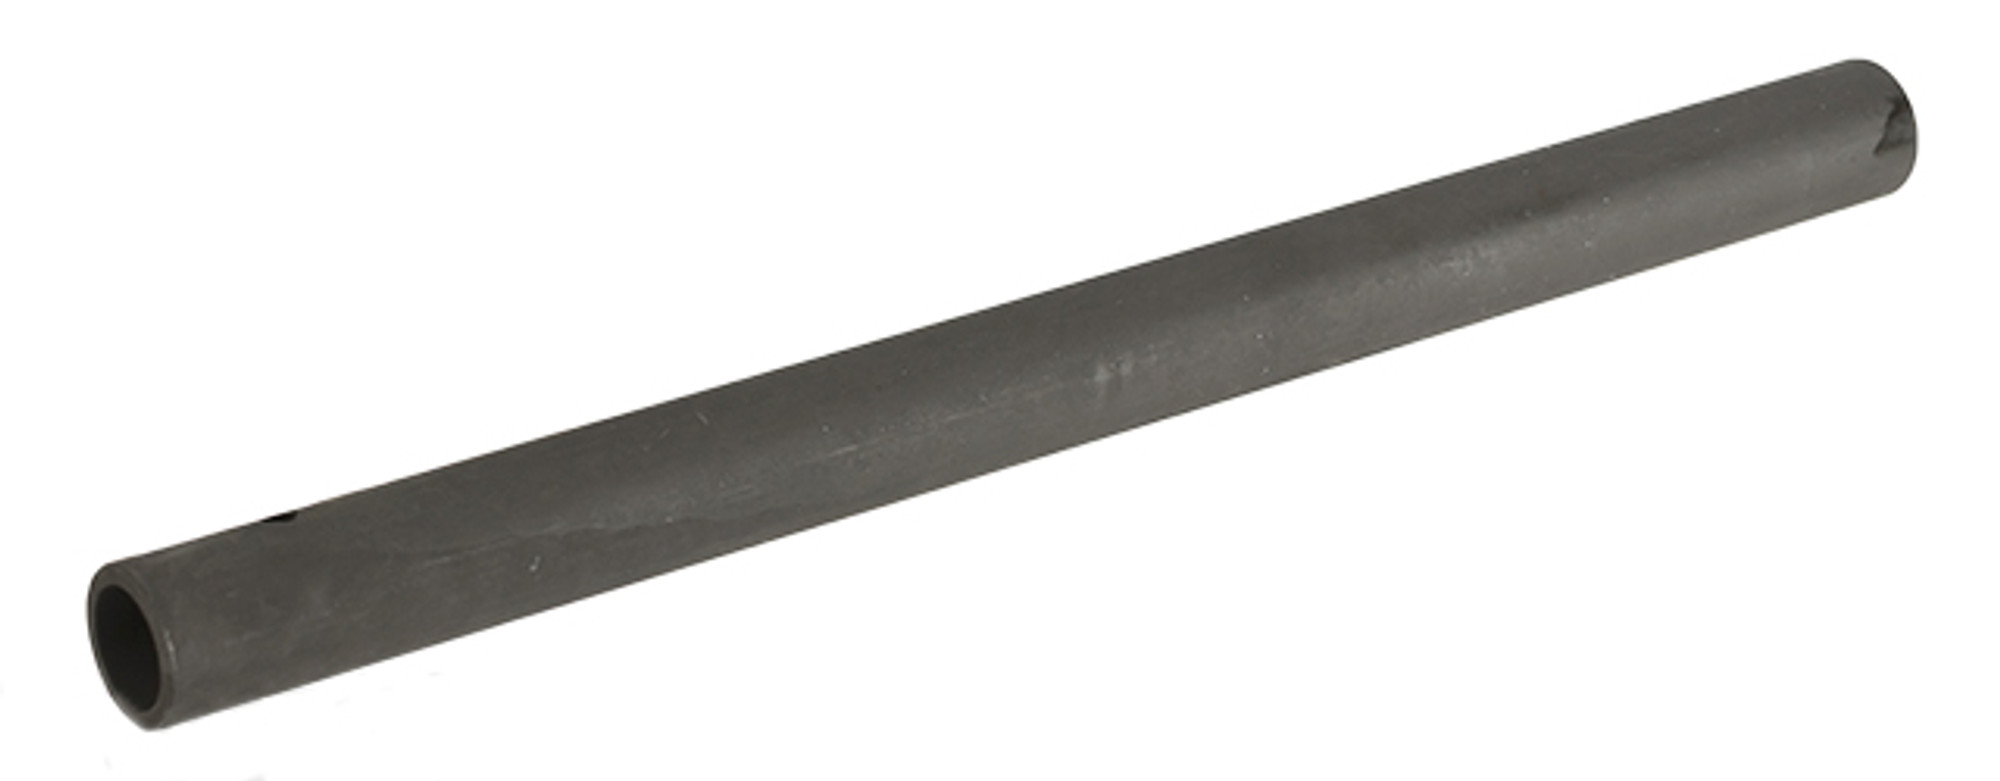 Guarder Reinforced Steel Outer Barrel for M4/M16 Airsoft AEG Rifles